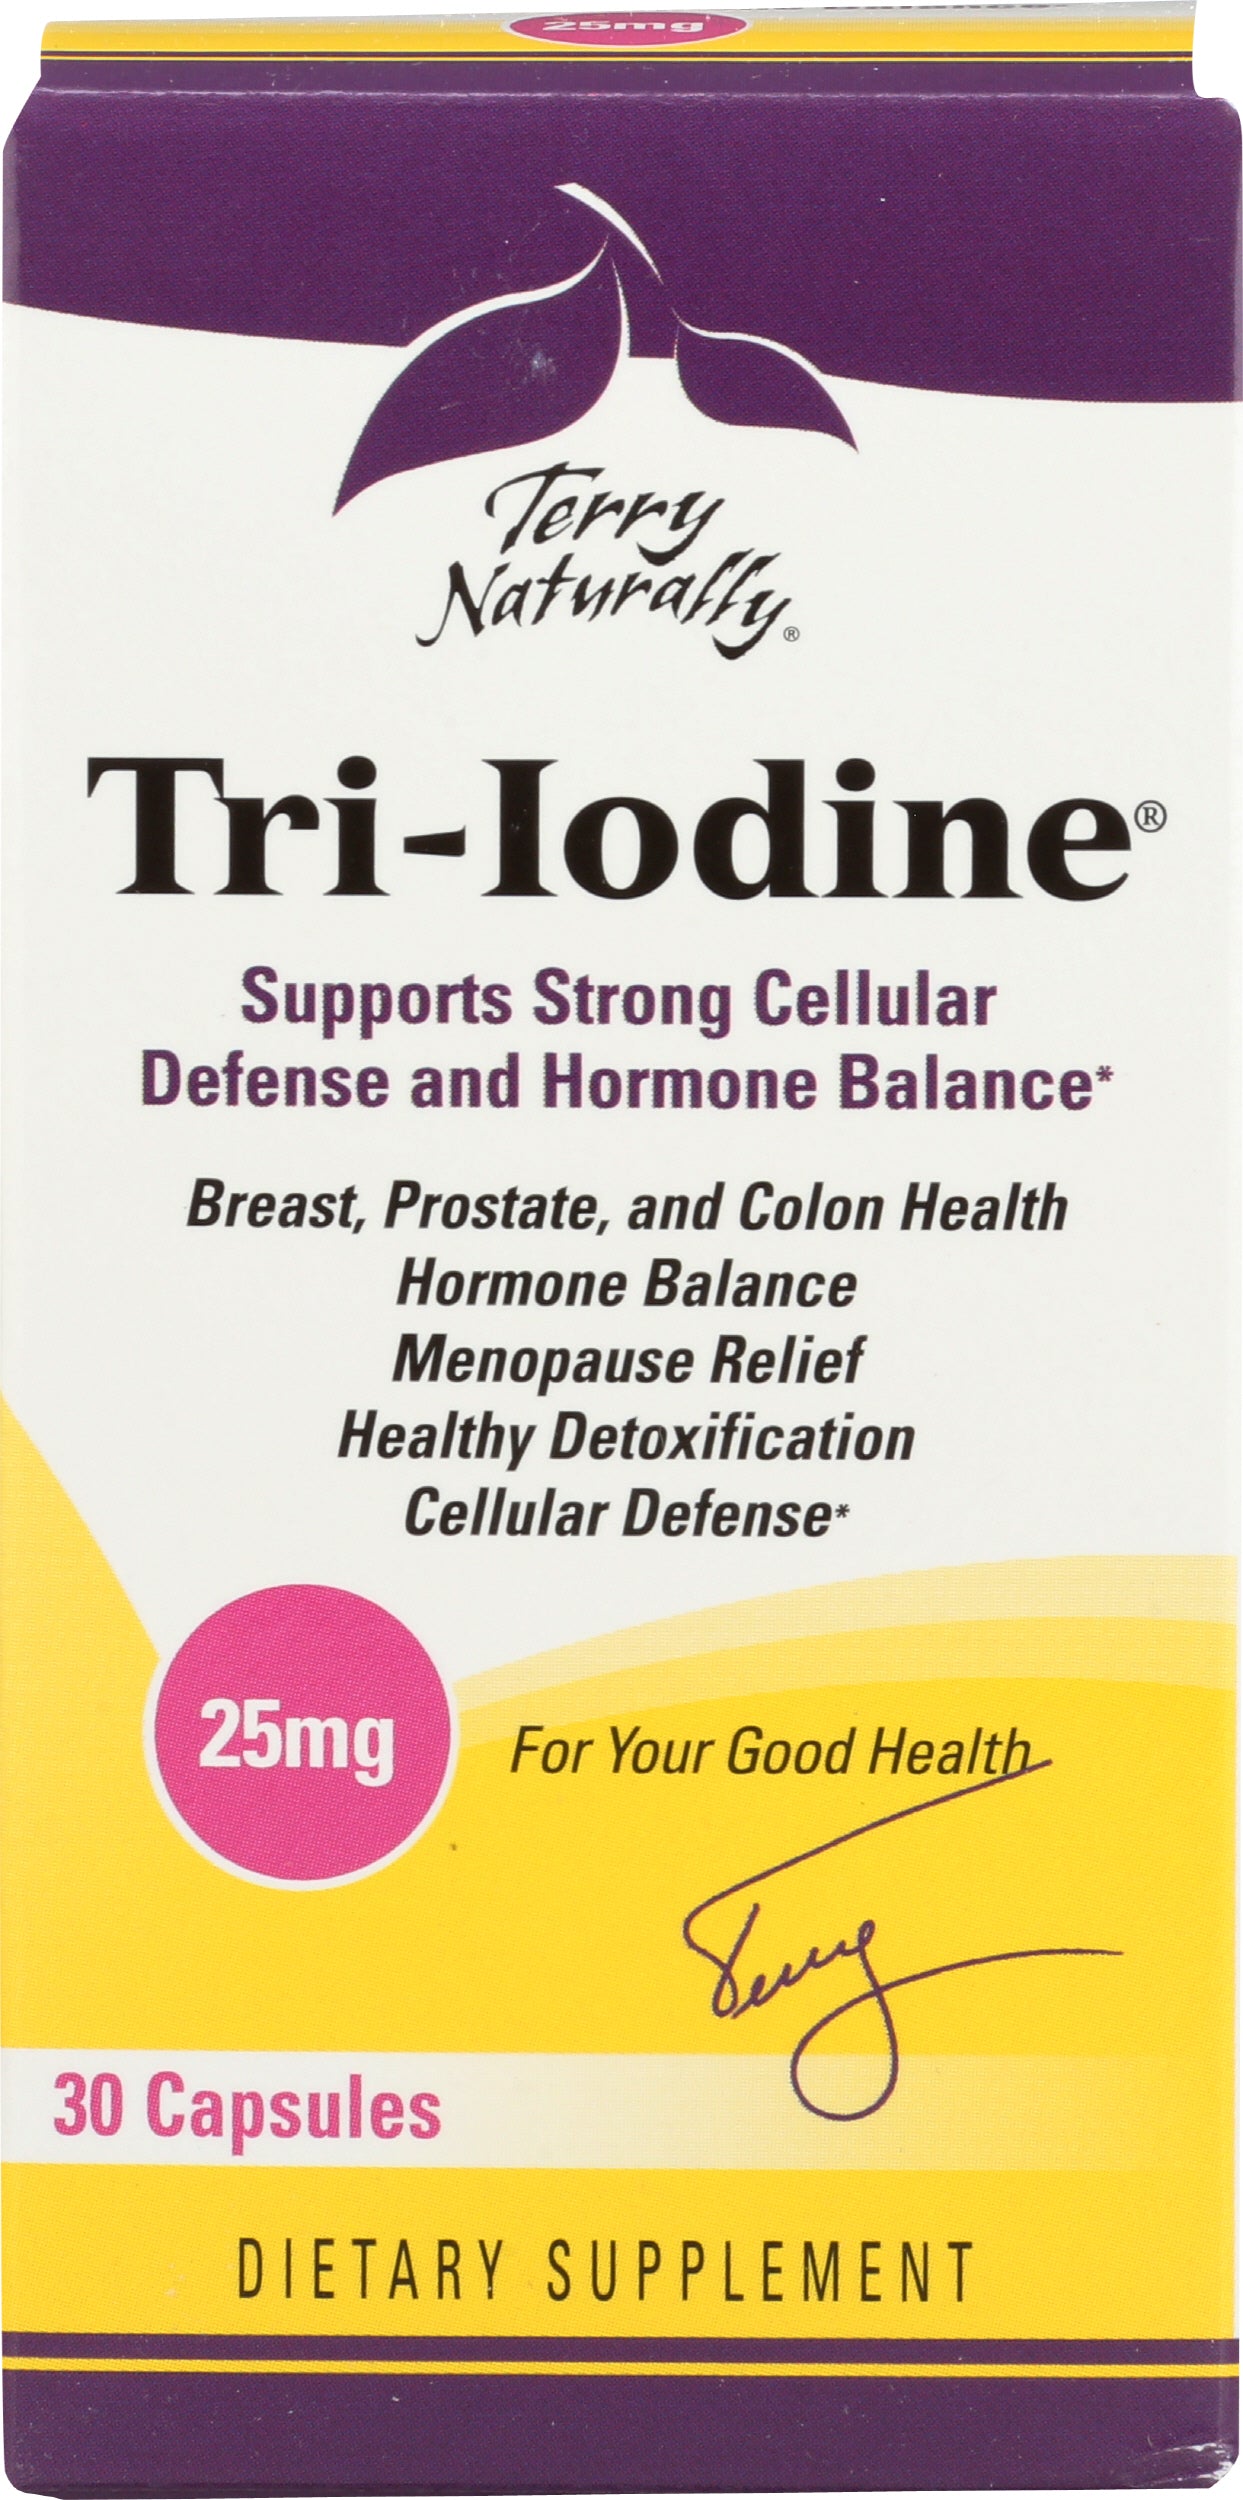 Terry Naturally Tri-Iodine 25mg 30 Capsules Front of Box